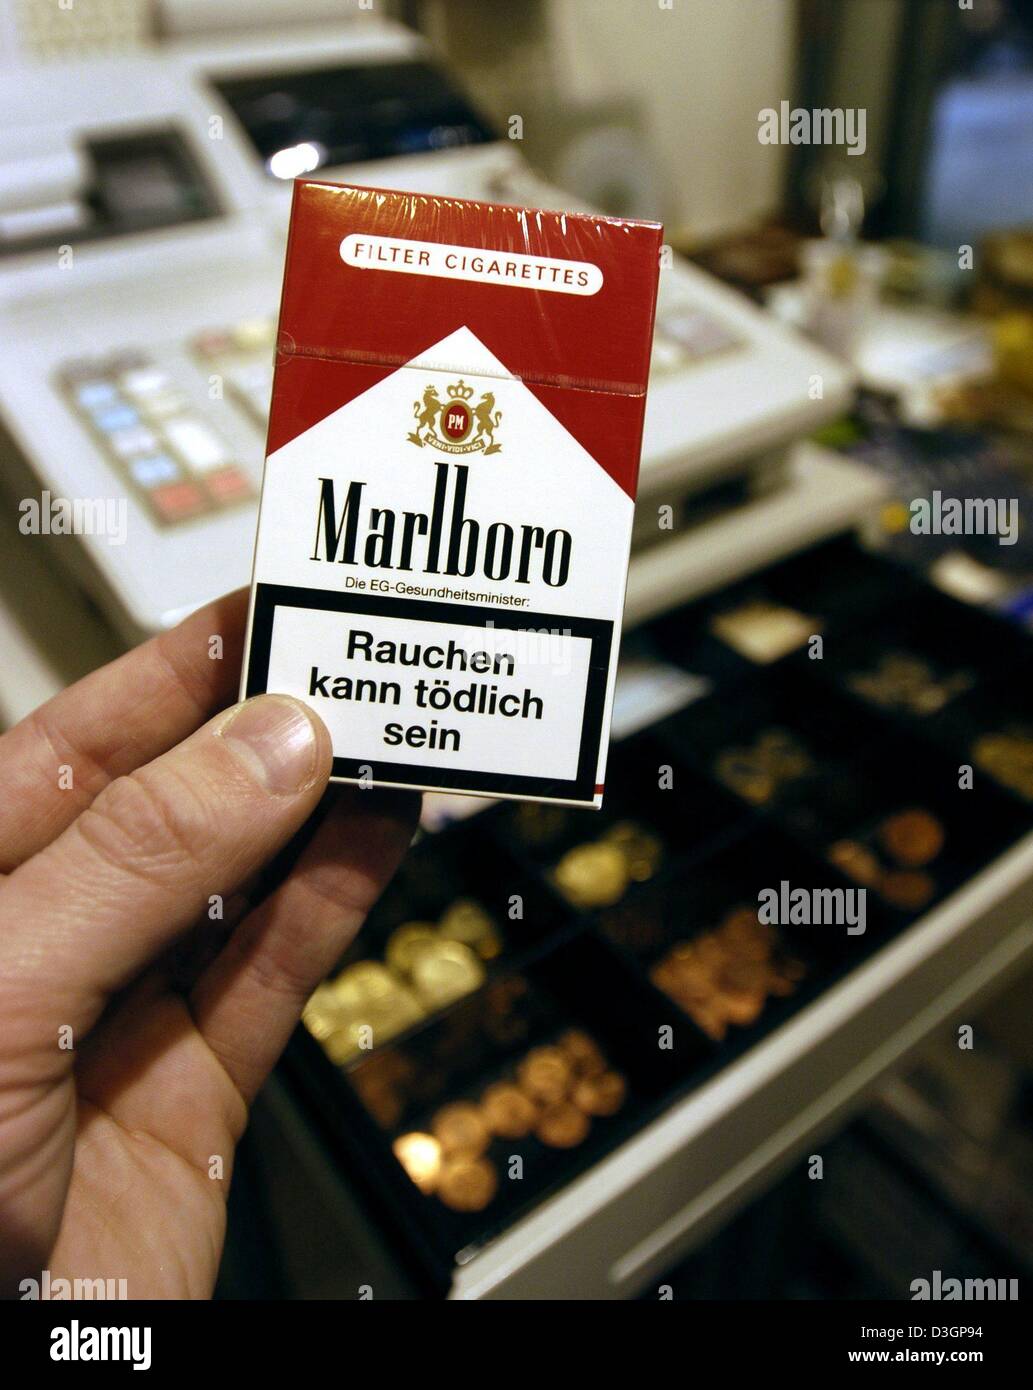 dpa) - A hand holds up a pack of Marlboro cigarettes in front of a cash  register in a tobacco shop in Regensburg, Germany, 4 March 2004. The  compulsory health warning on